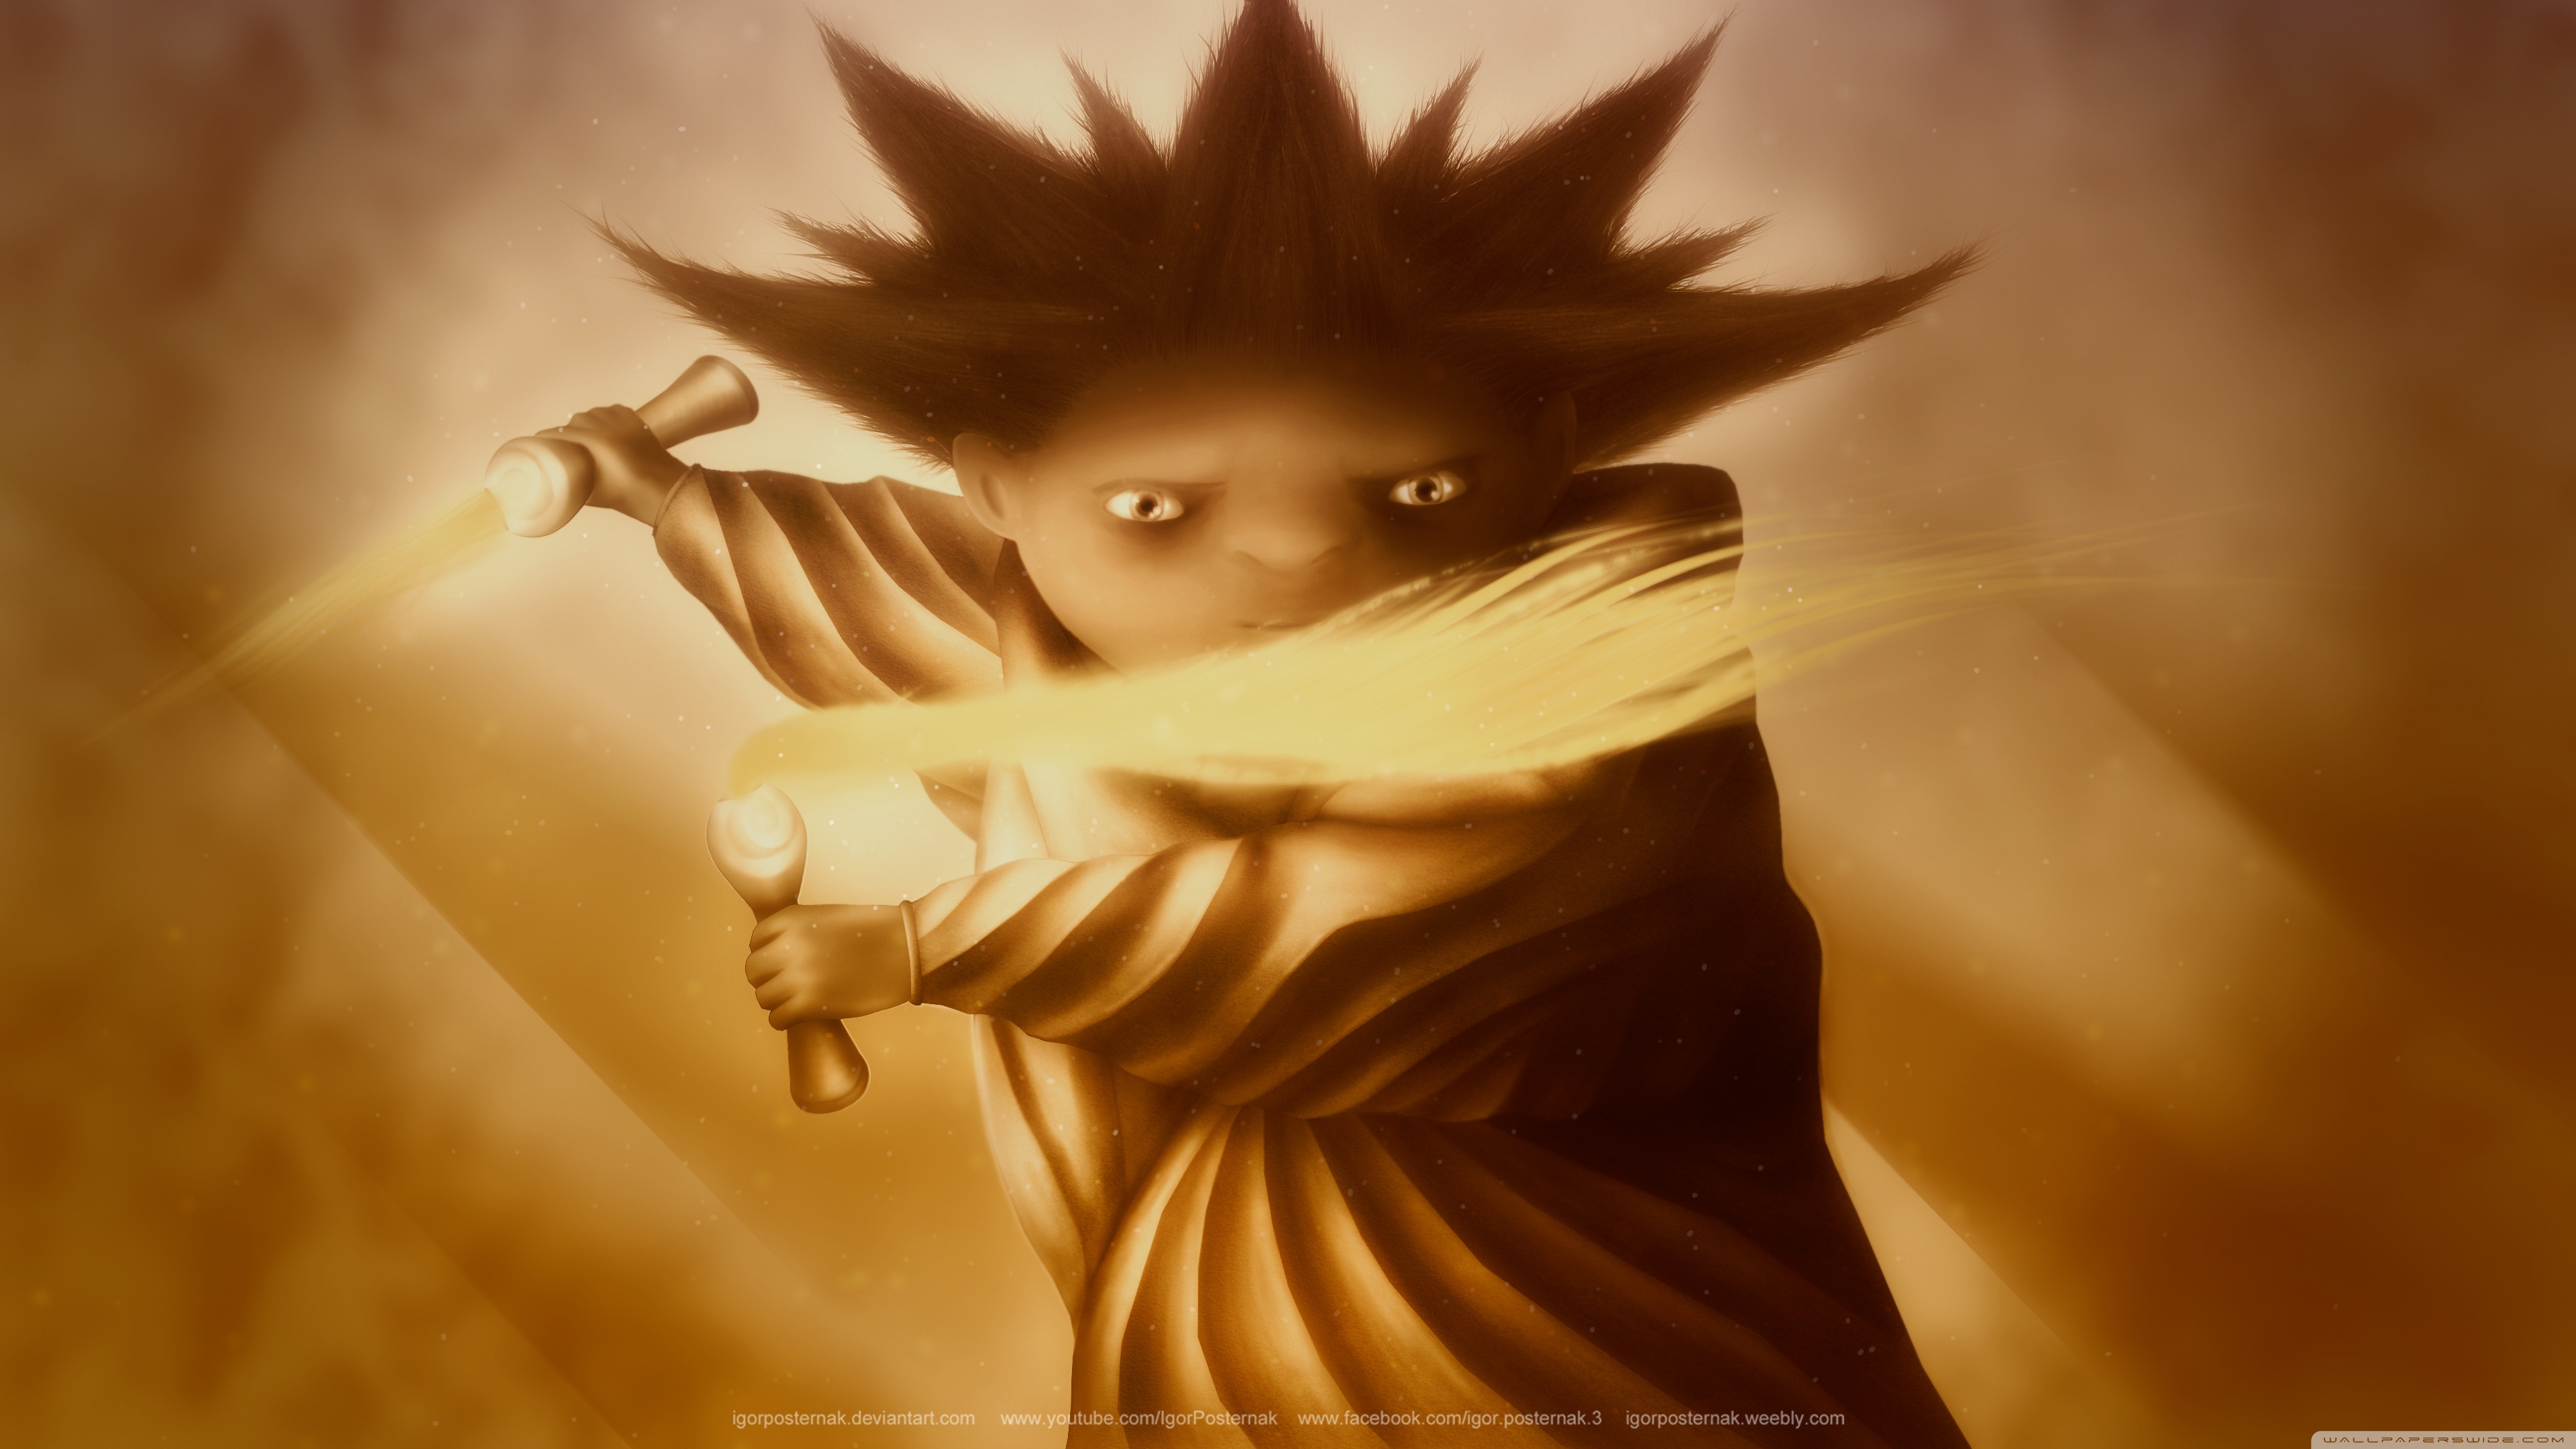 the sandman 1080P 2k 4k Full HD Wallpapers Backgrounds Free Download   Wallpaper Crafter